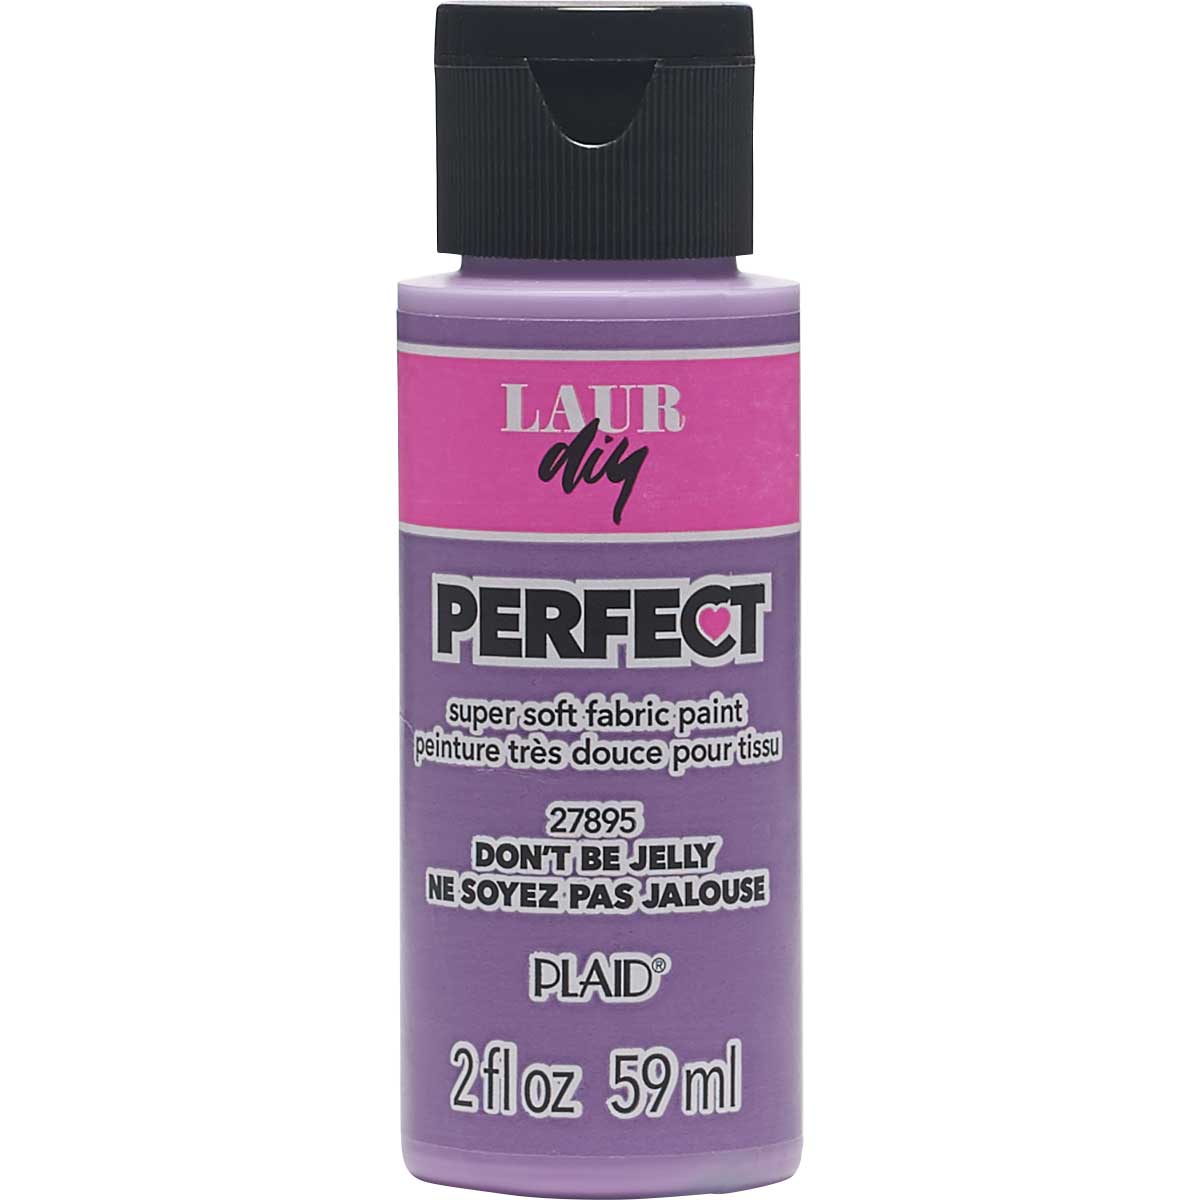 LaurDIY ® Perfect Fabric Paint - Don't Be Jelly, 2 oz. - 27895